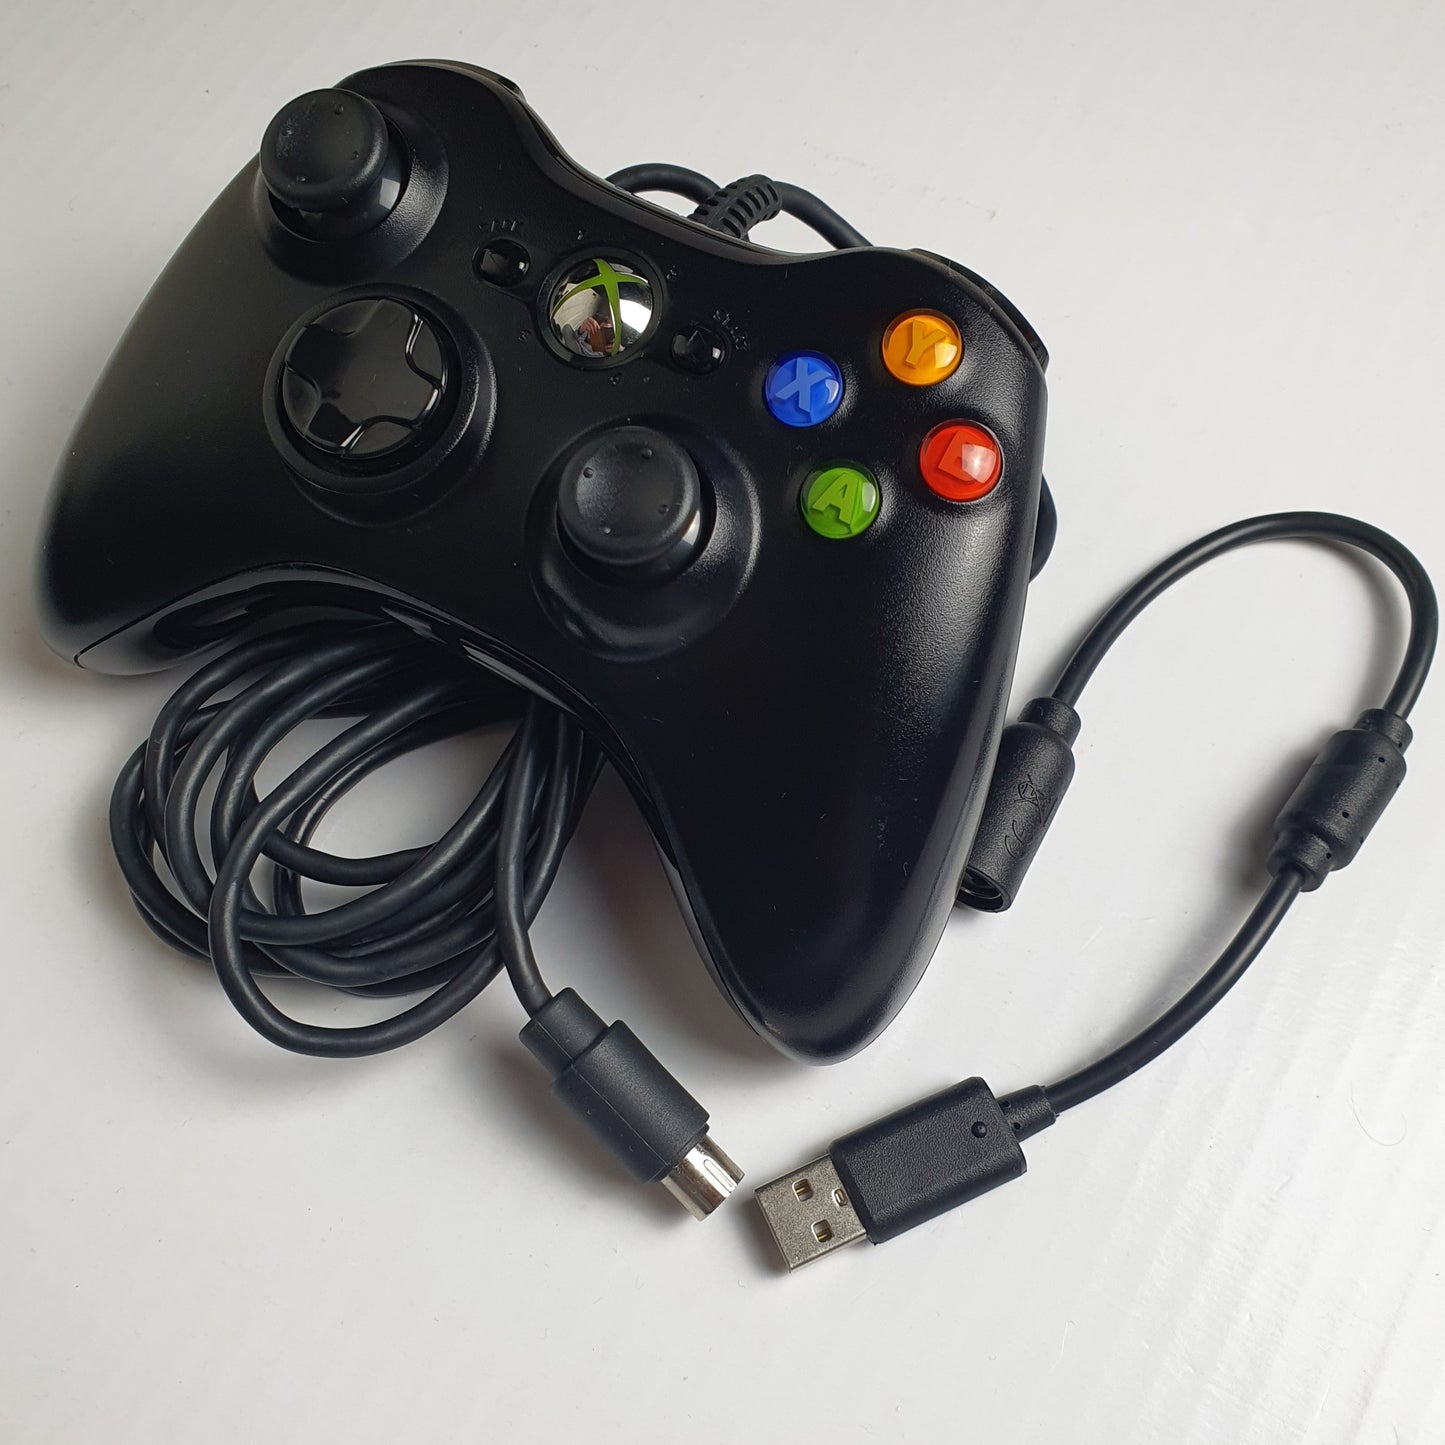 Official Microsoft Xbox 360 'S' Wired Black Controller w/ Breakaway Cable